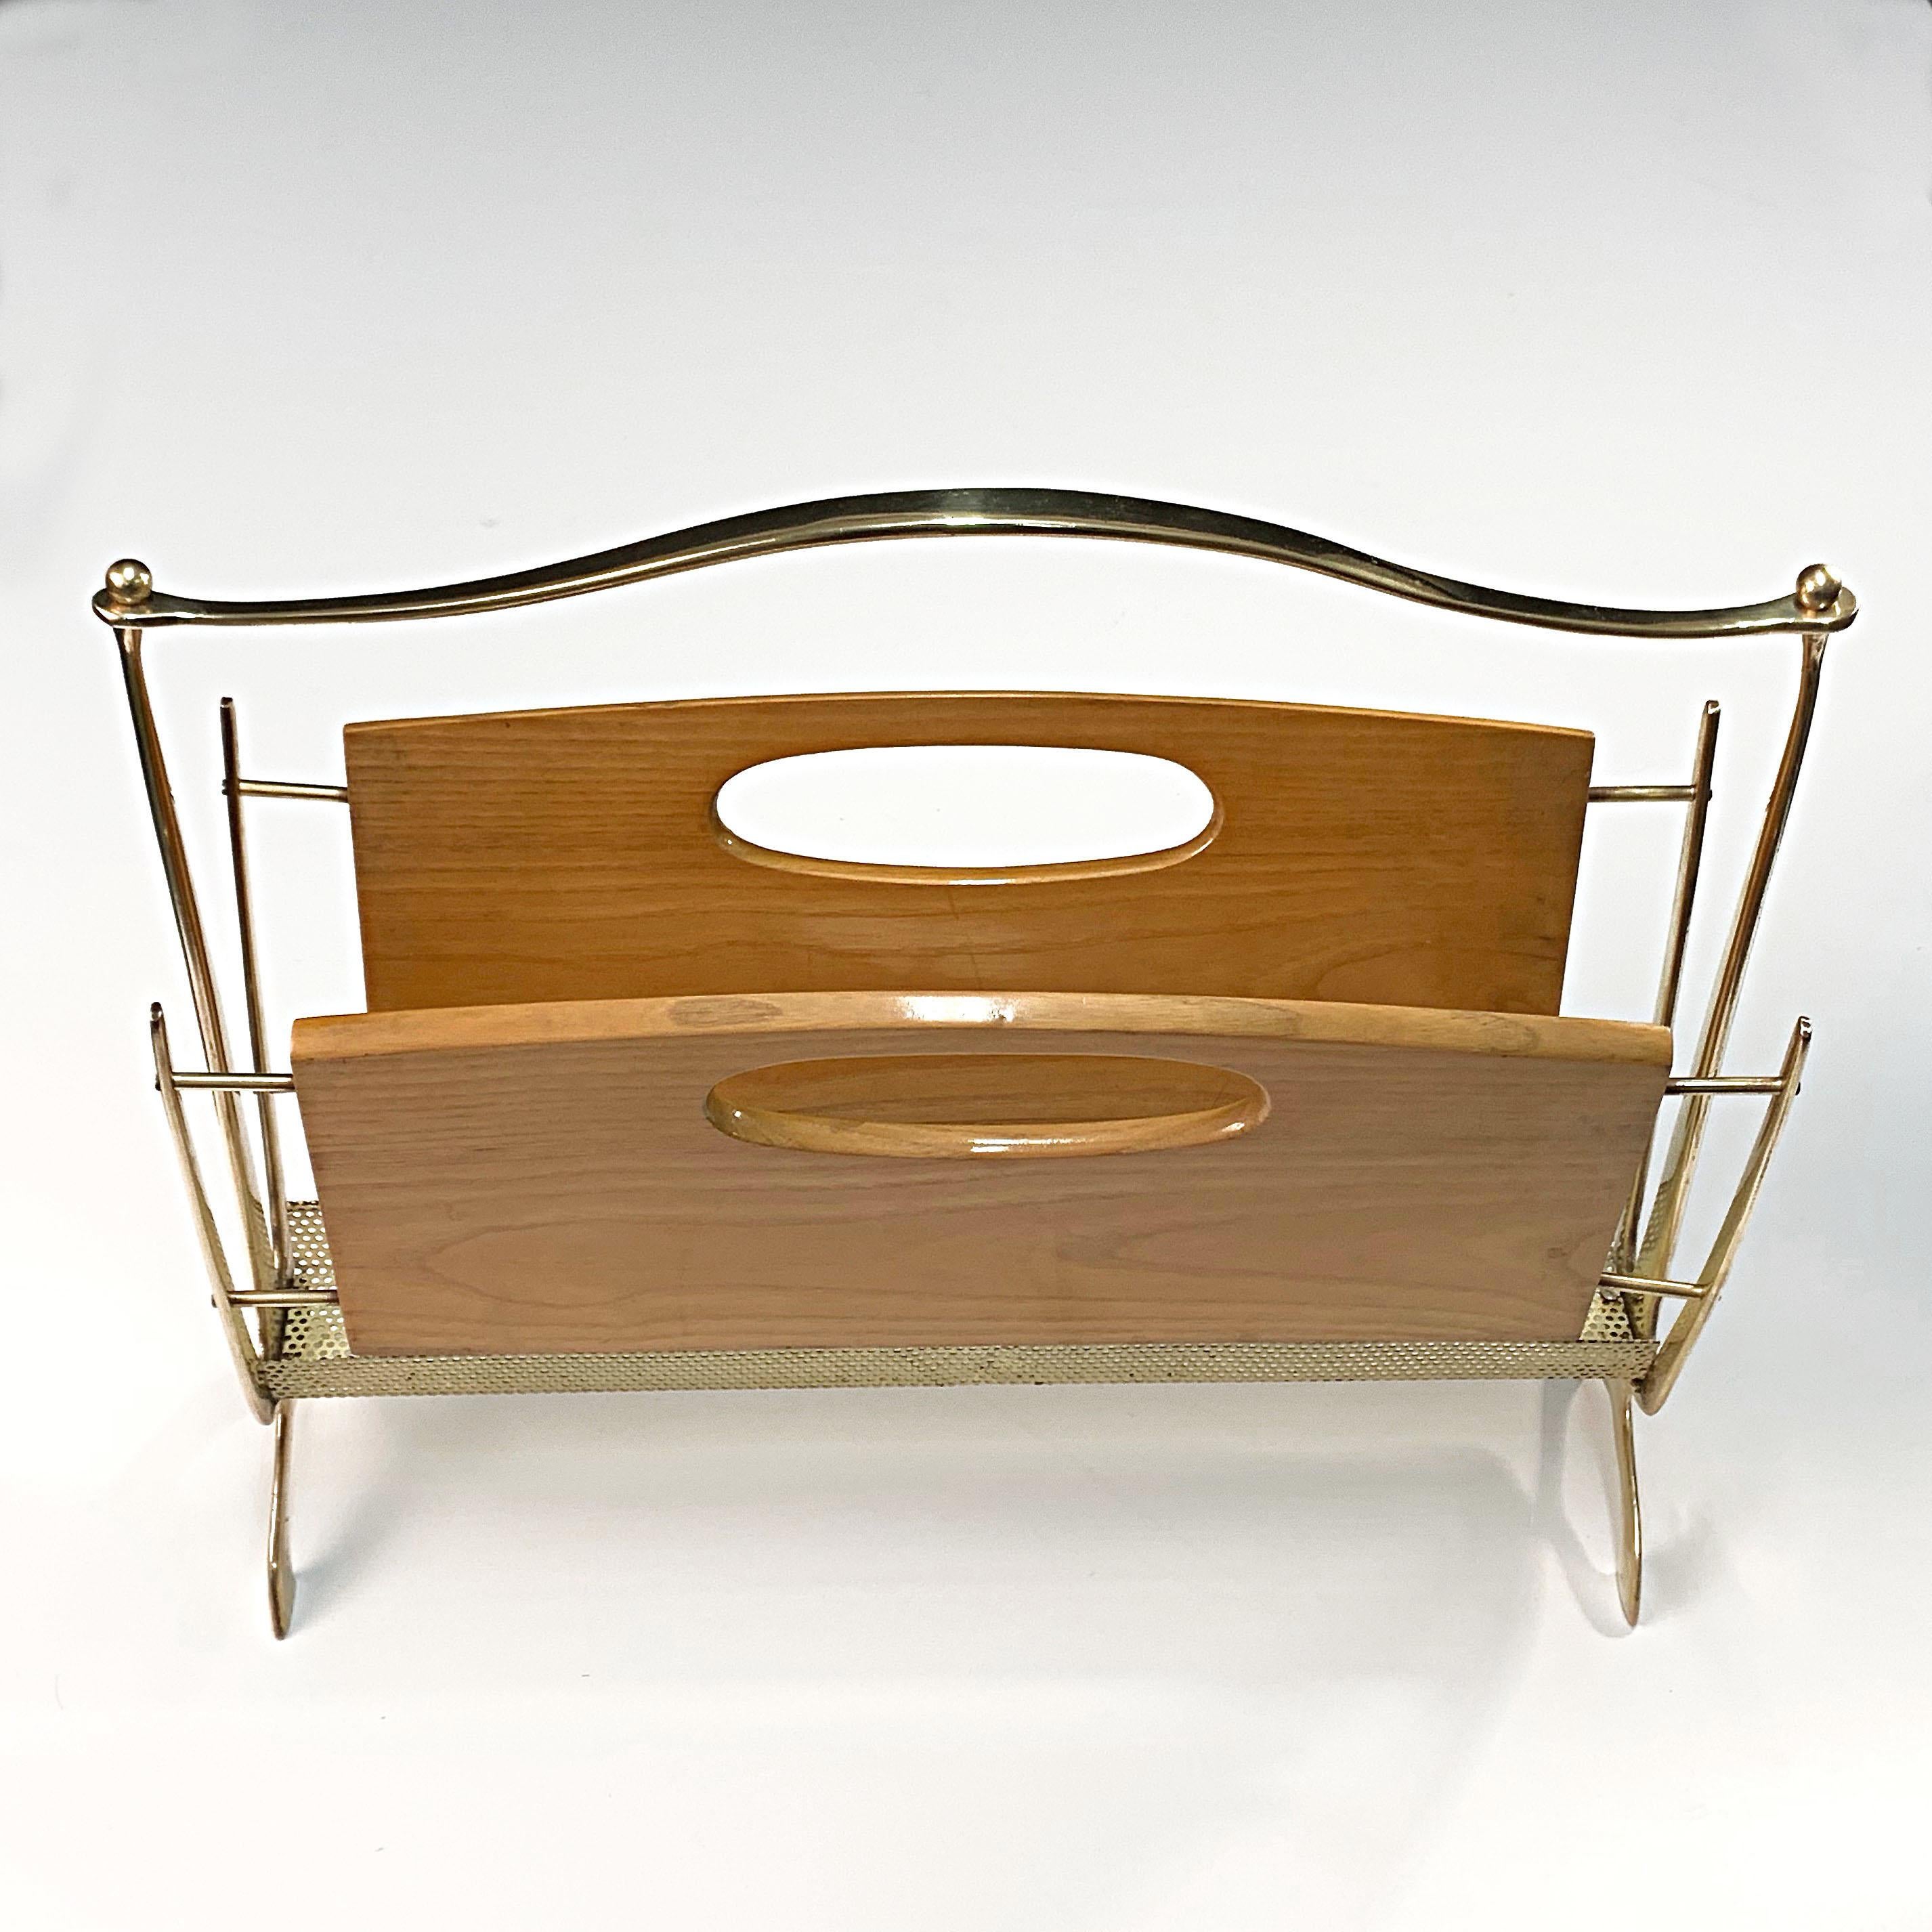 Maison Baguès Midcentury Brass and Chestnut Wood French Magazine Rack, 1950s For Sale 5